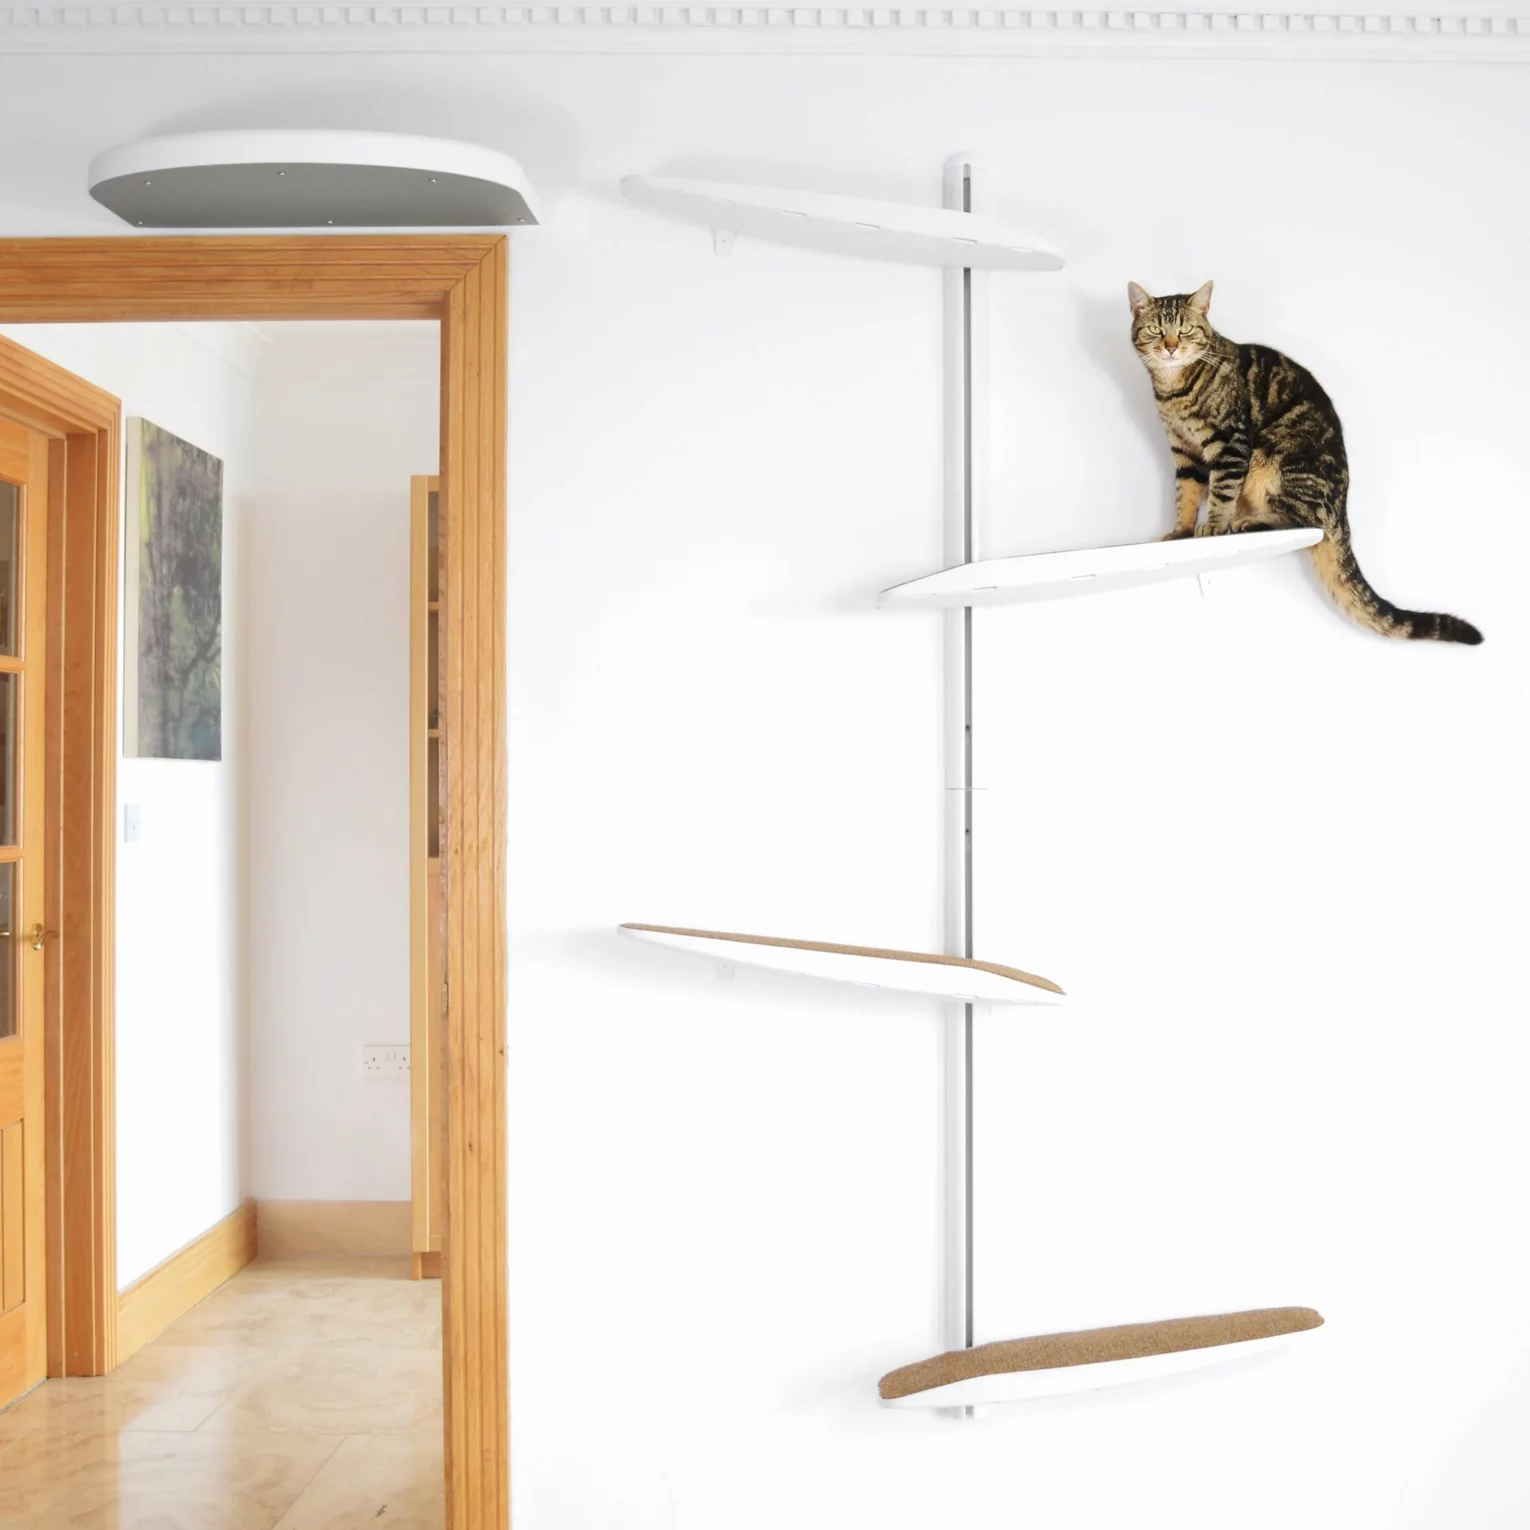 il fullxfull.3353462937 fxjb 1530x1530 - Elevate Your Feline's World: The Benefits of Wall-Mounted Cat Trees